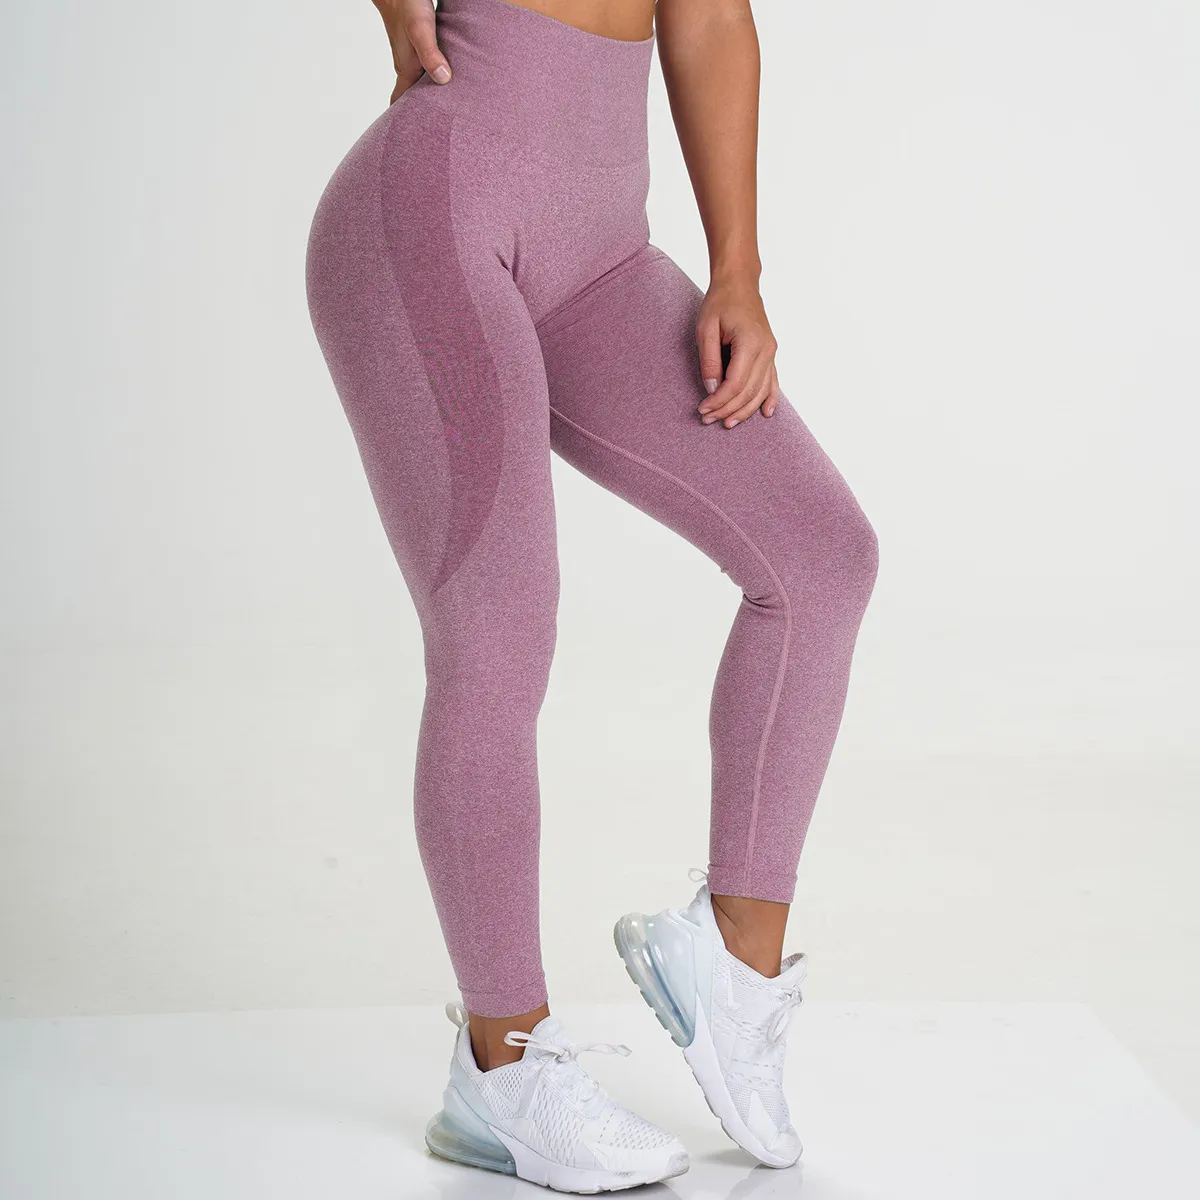 High Waist Seamless Assless Yoga Pants With Hips For Women Push Up,  Stretchy, And Athletic Fitness Leggings For Running, Training, Gym,  Lifting, Sports, Cycling, Or Activewear From Aaa99901, $14.7